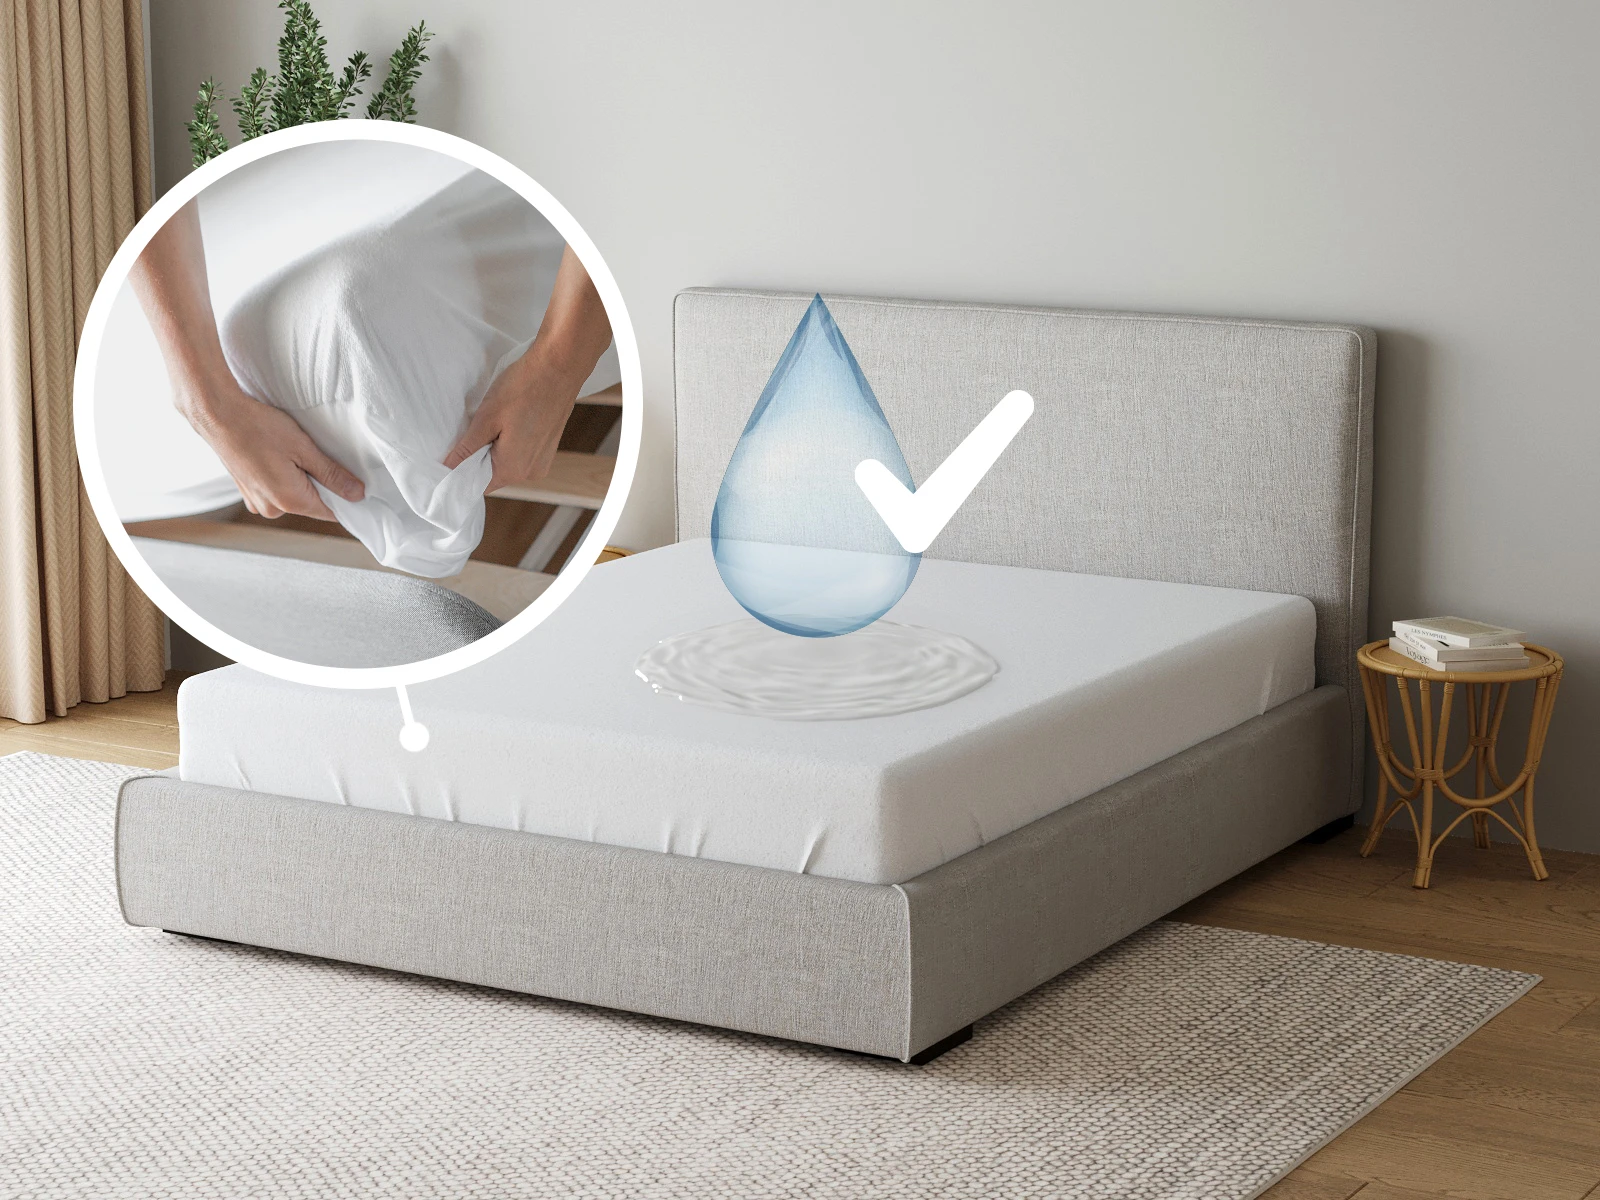 1 Waterproof mattress protector all-round protective cover 120x200cm